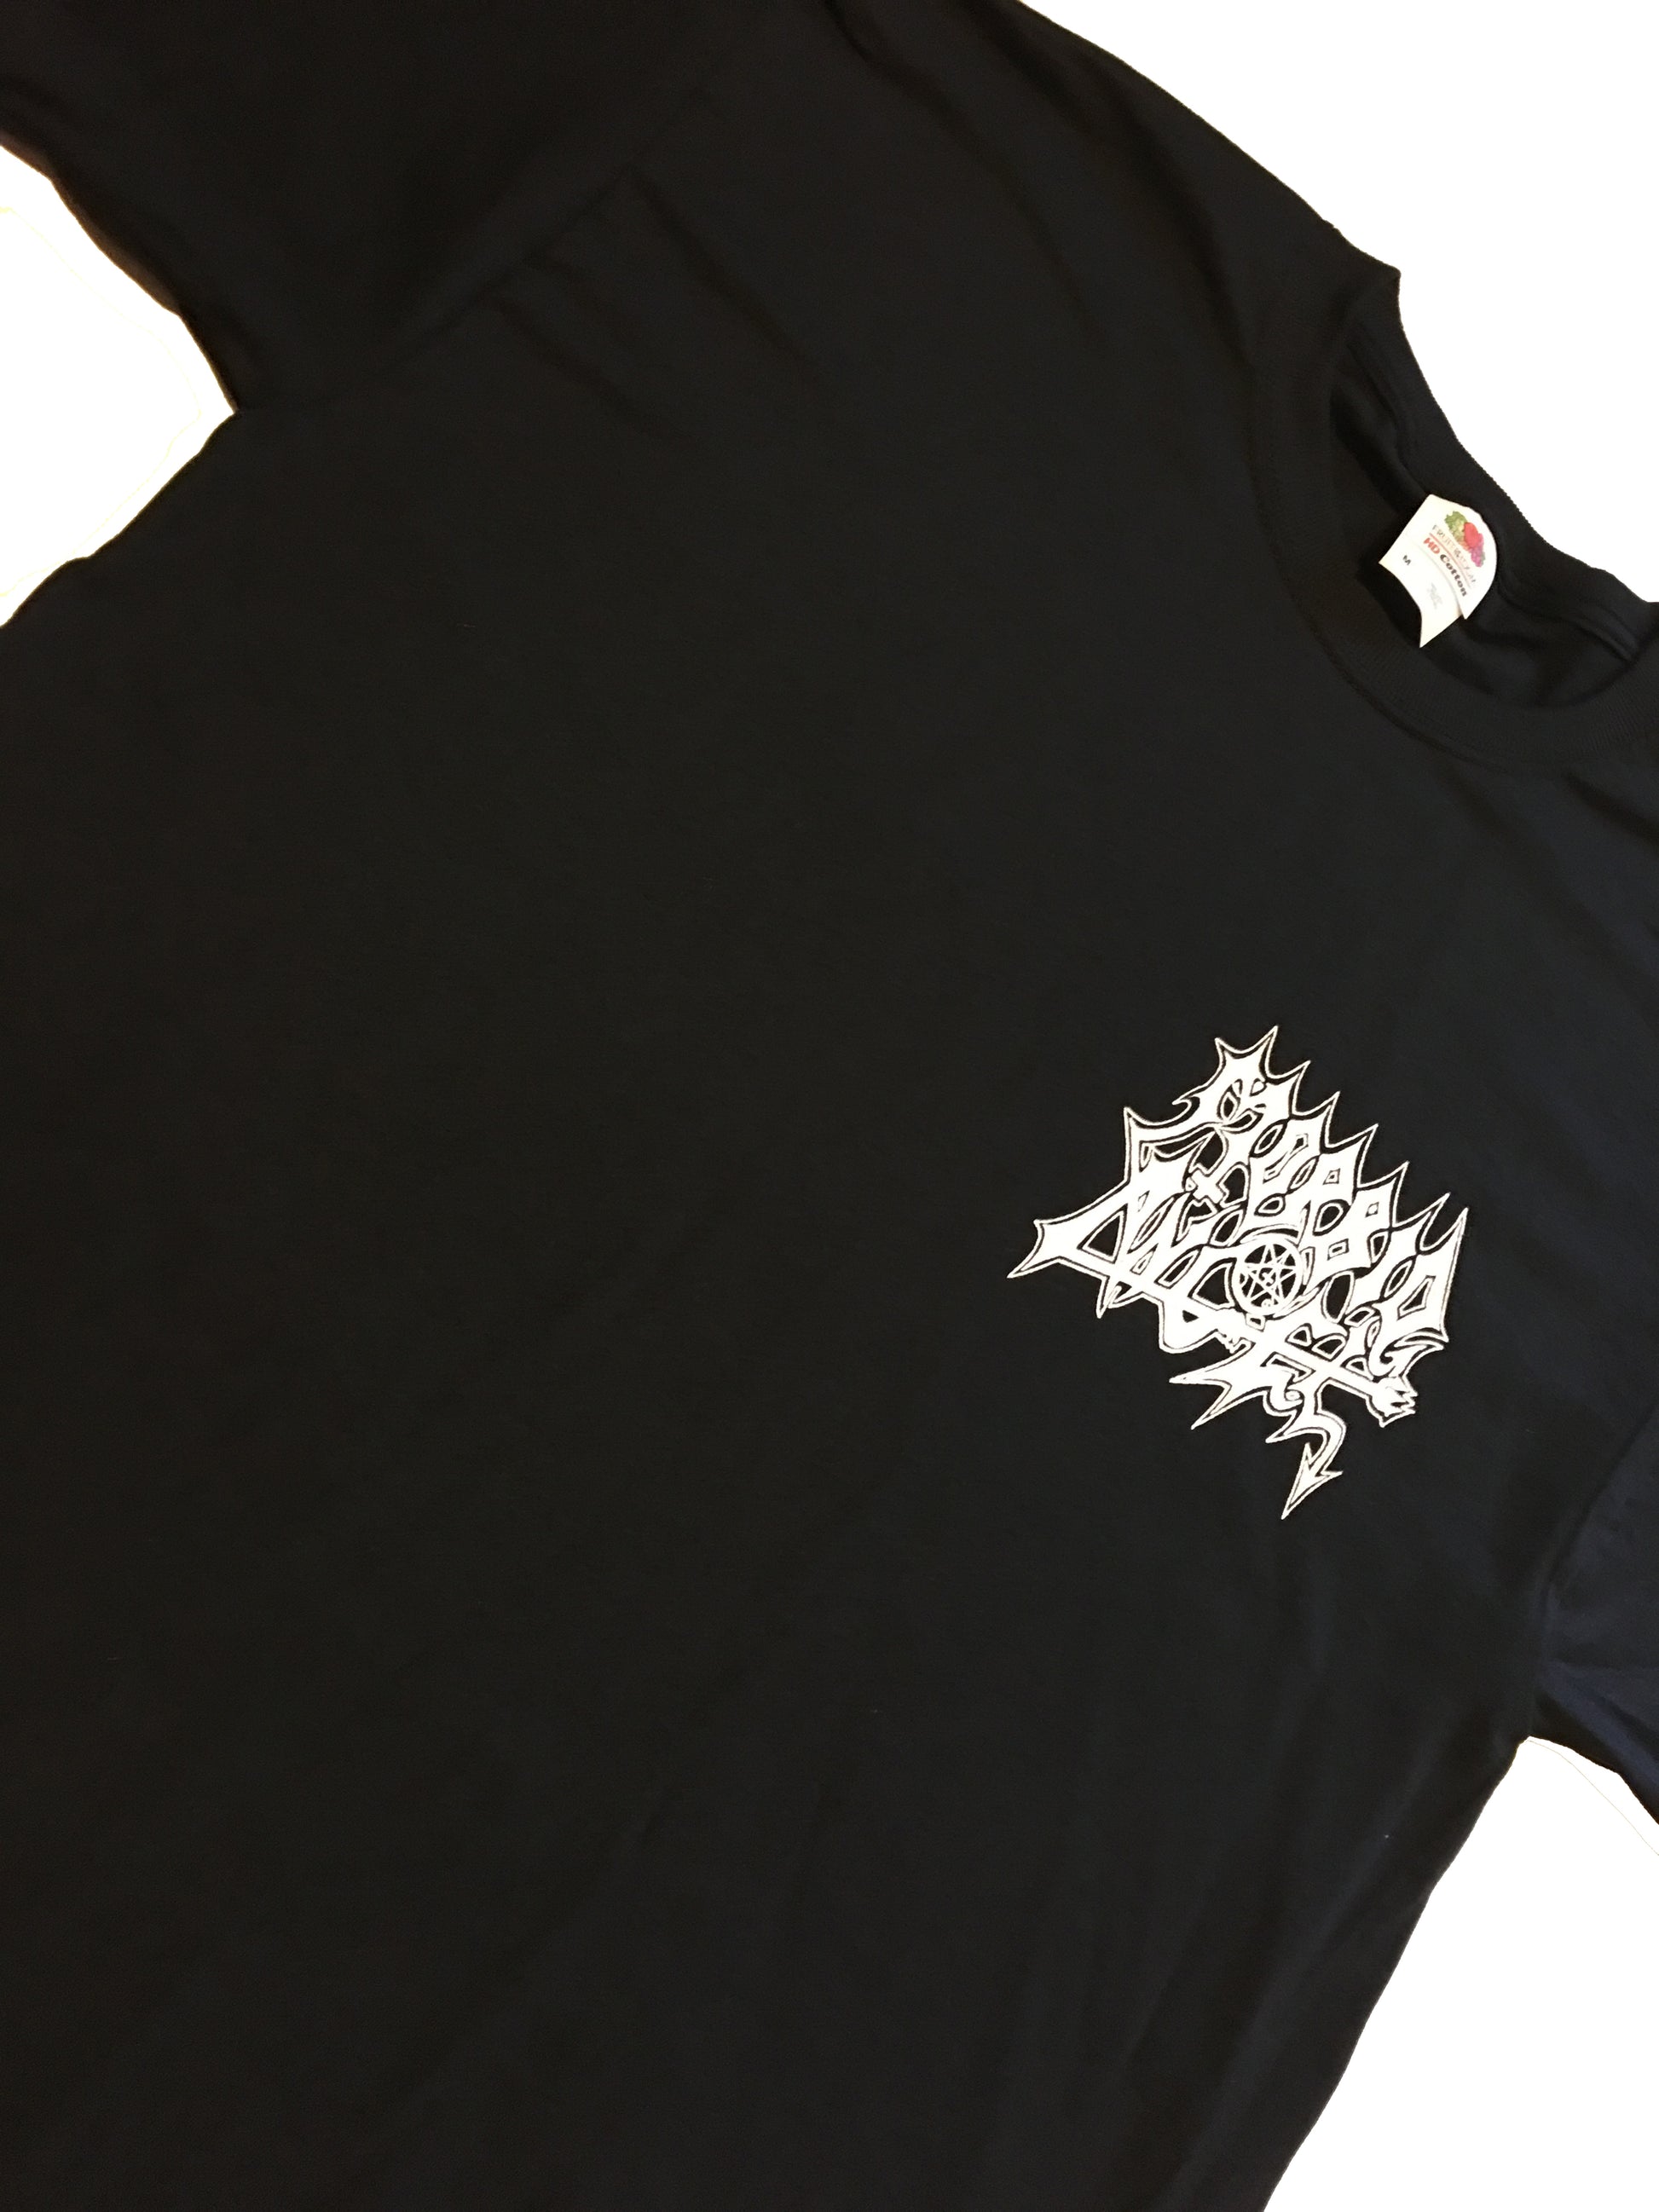 Evil  death metal pocket print shirt for Union members to curse others